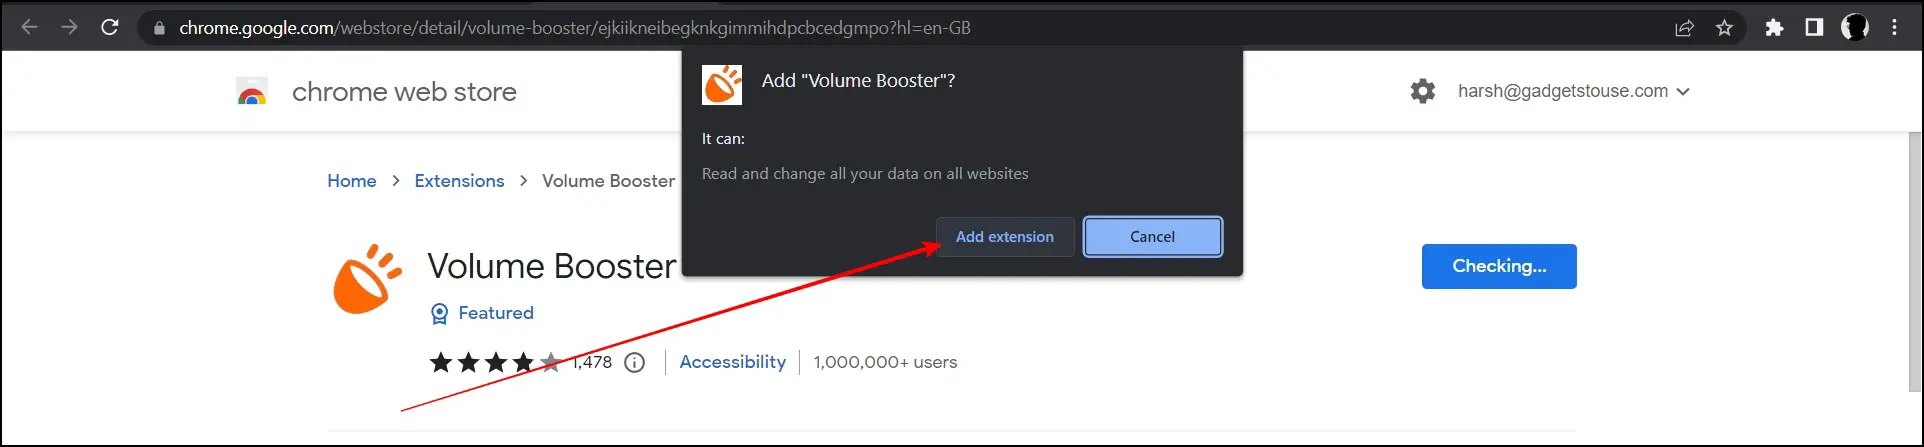 Volume Booster Extension To Increase Volume In Google Chrome